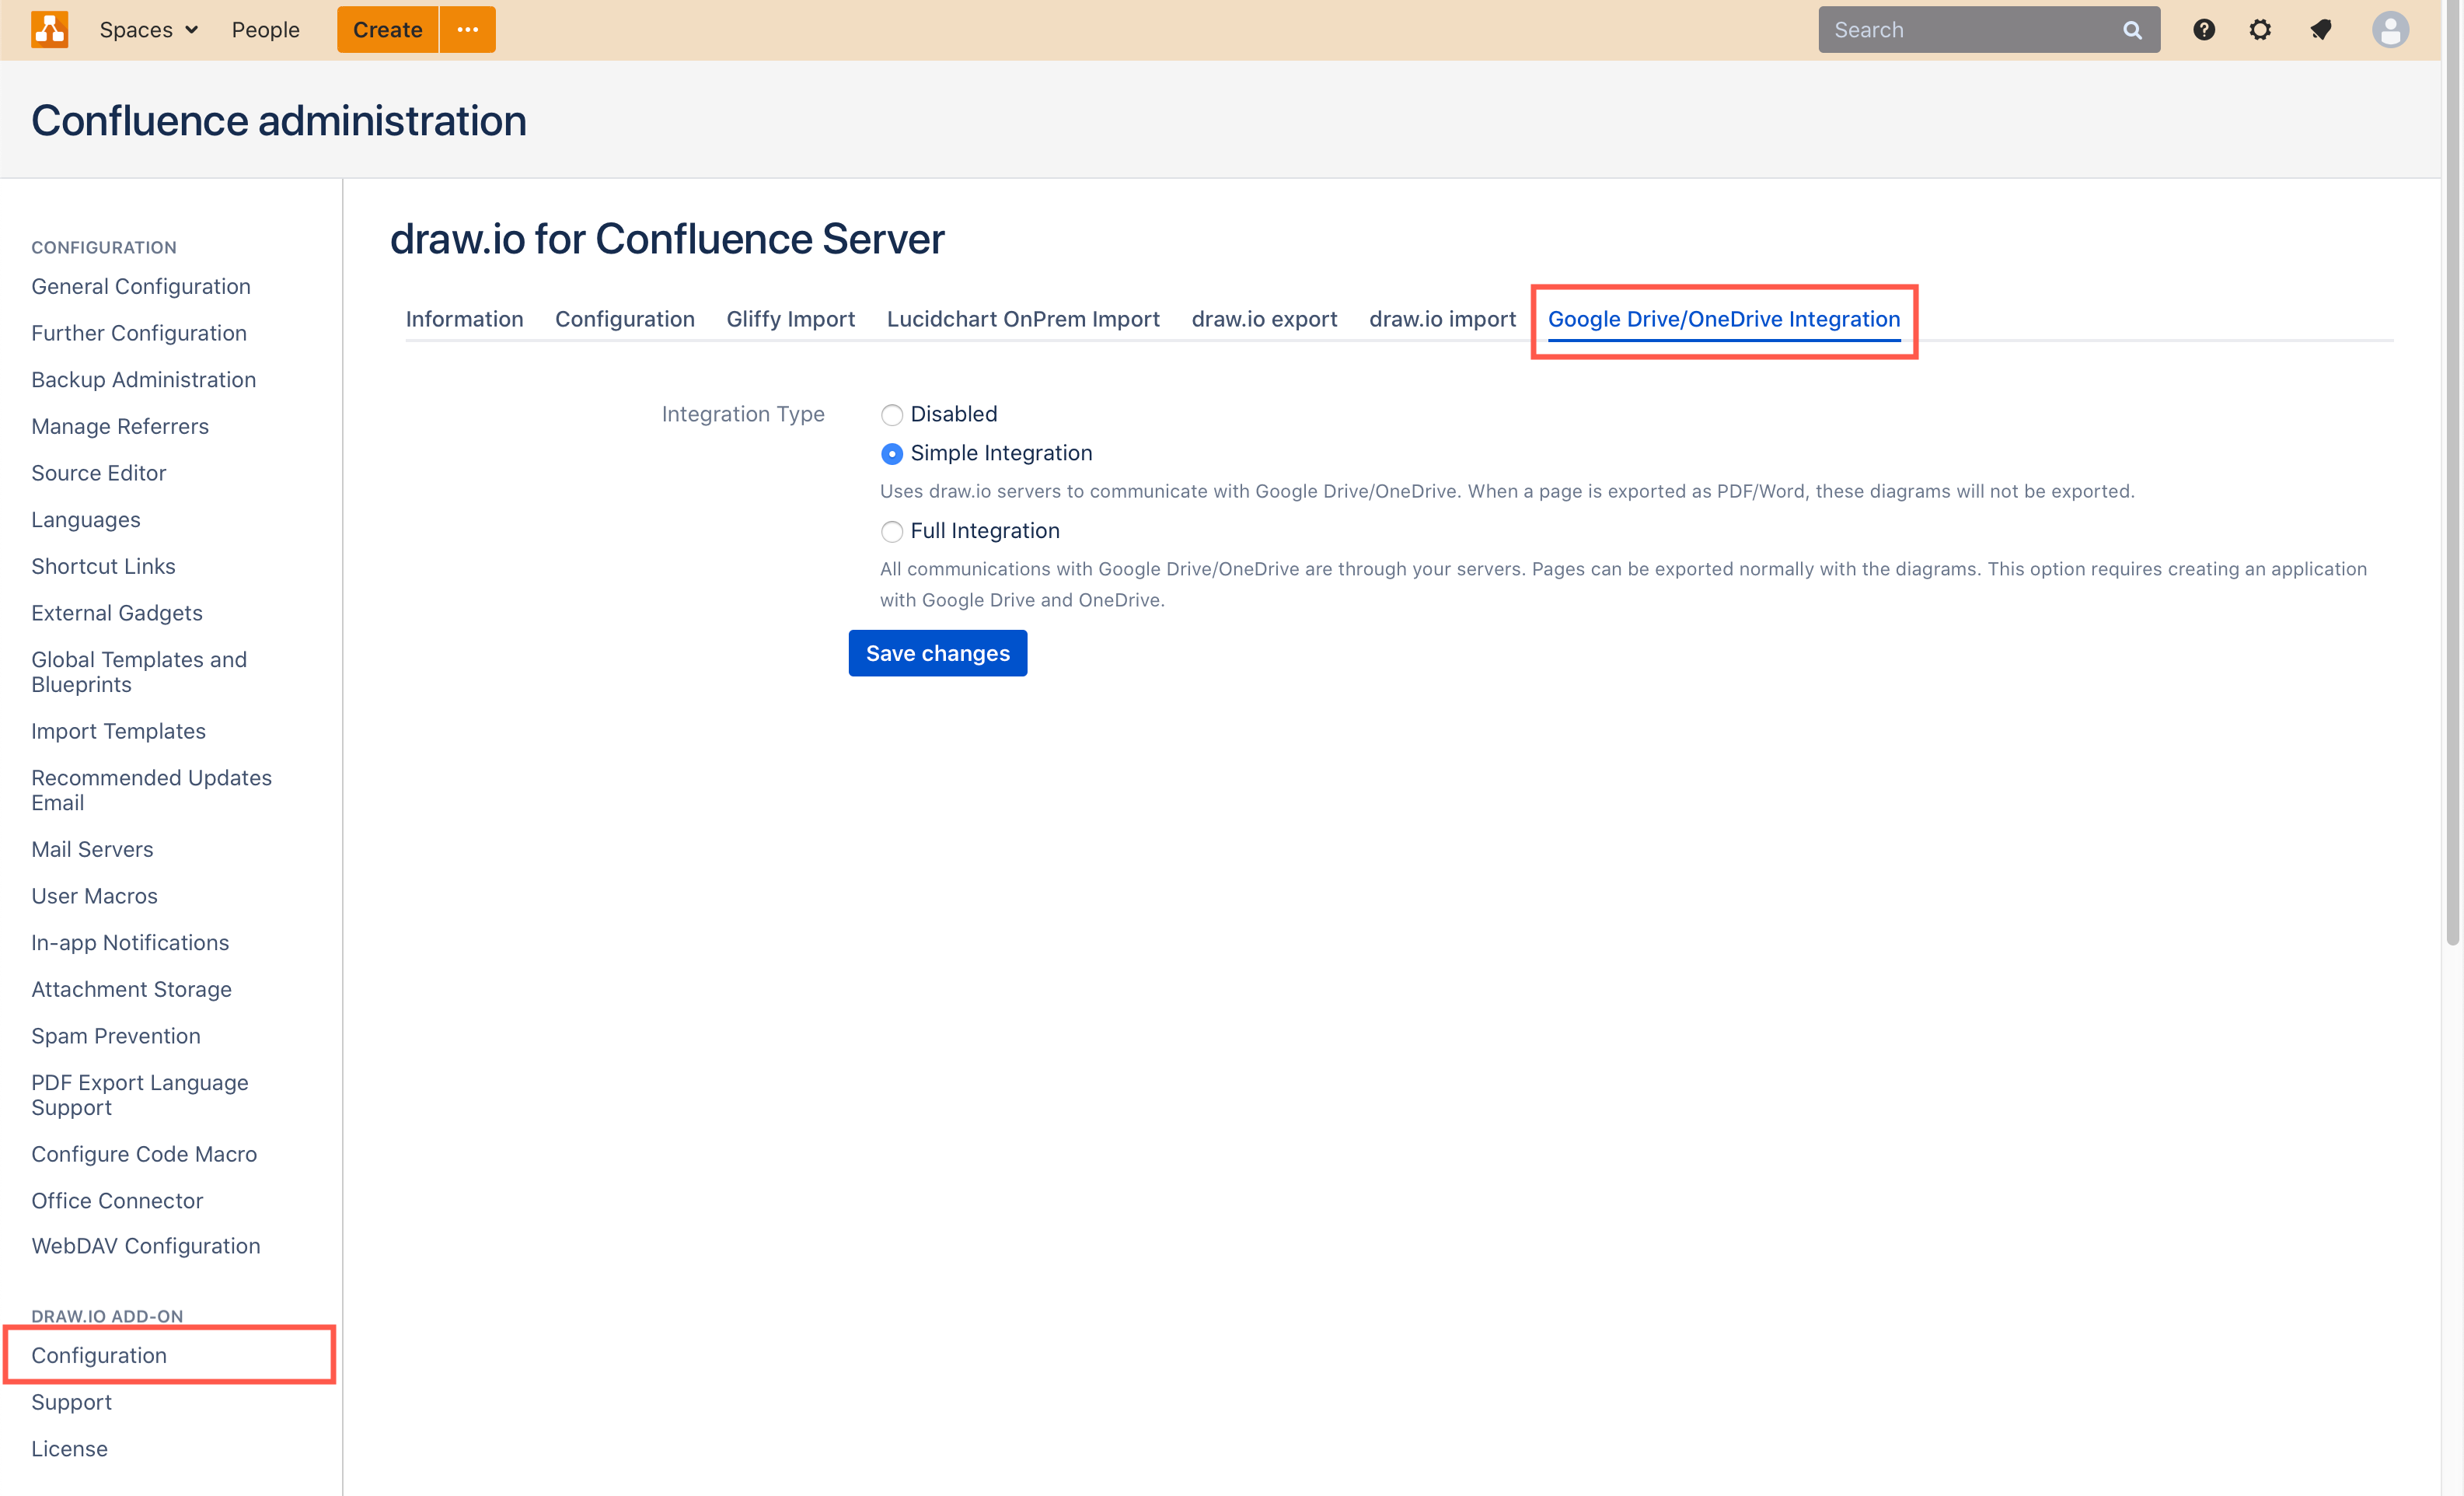 As an administrator, enable the draw.io Google Drive/One Drive integration in Confluence Data Center and Server